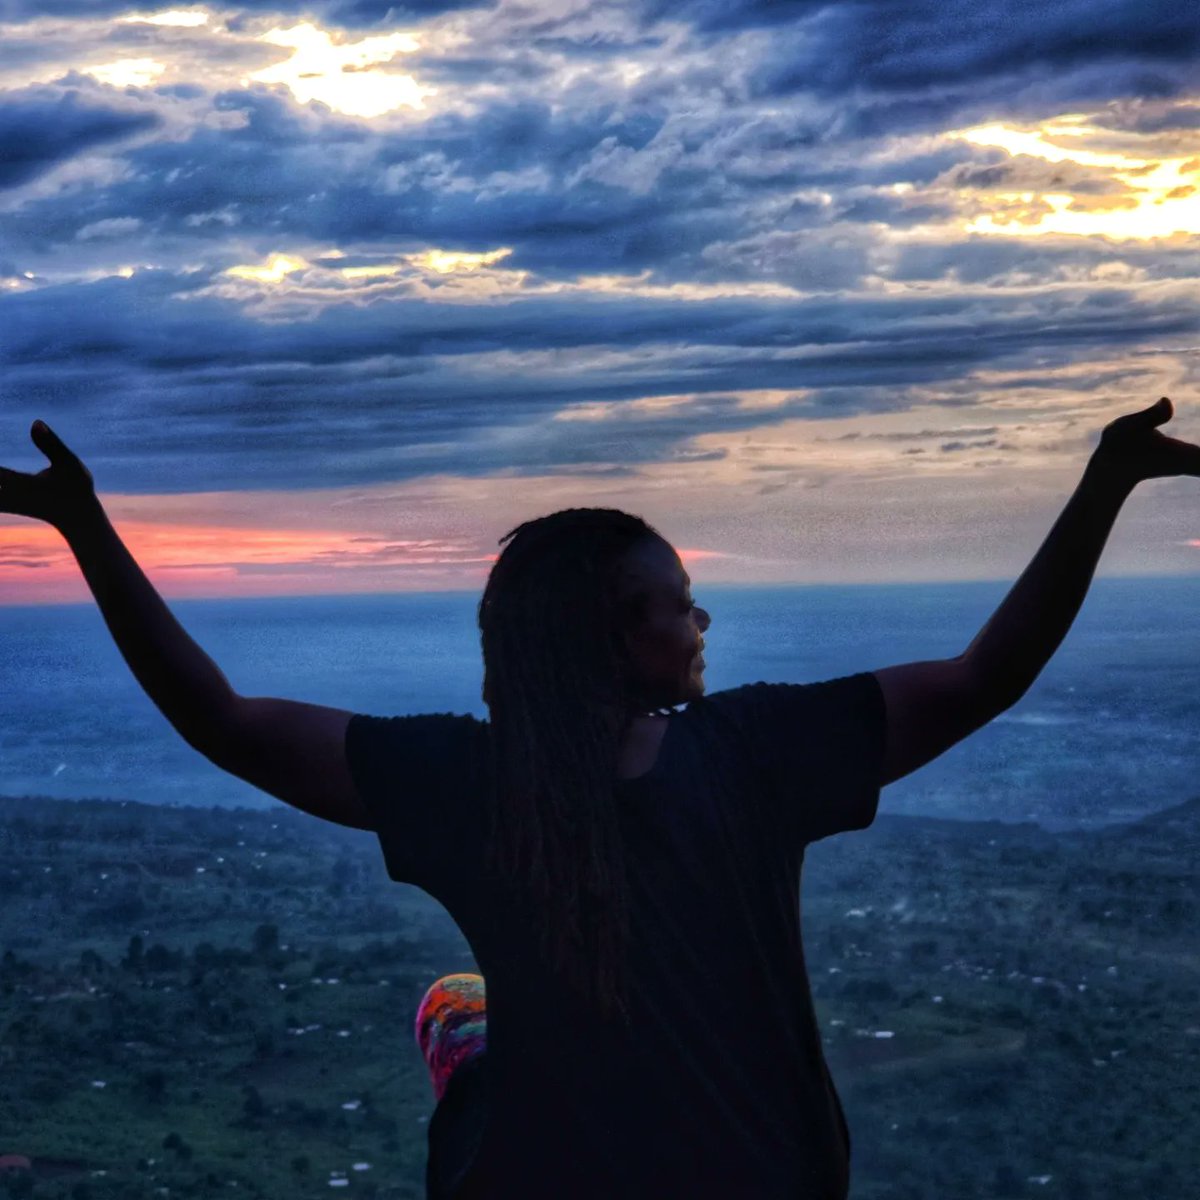 The best sunset moments captured from sipi falls While at sipi don't miss the beautiful view of the plains, waterfalls and the mount elgon view as you enjoy the sun setting below in the horizons #kingsviewpoint #sipifallsexplorers #0786997175 whatsapp number +256707940532